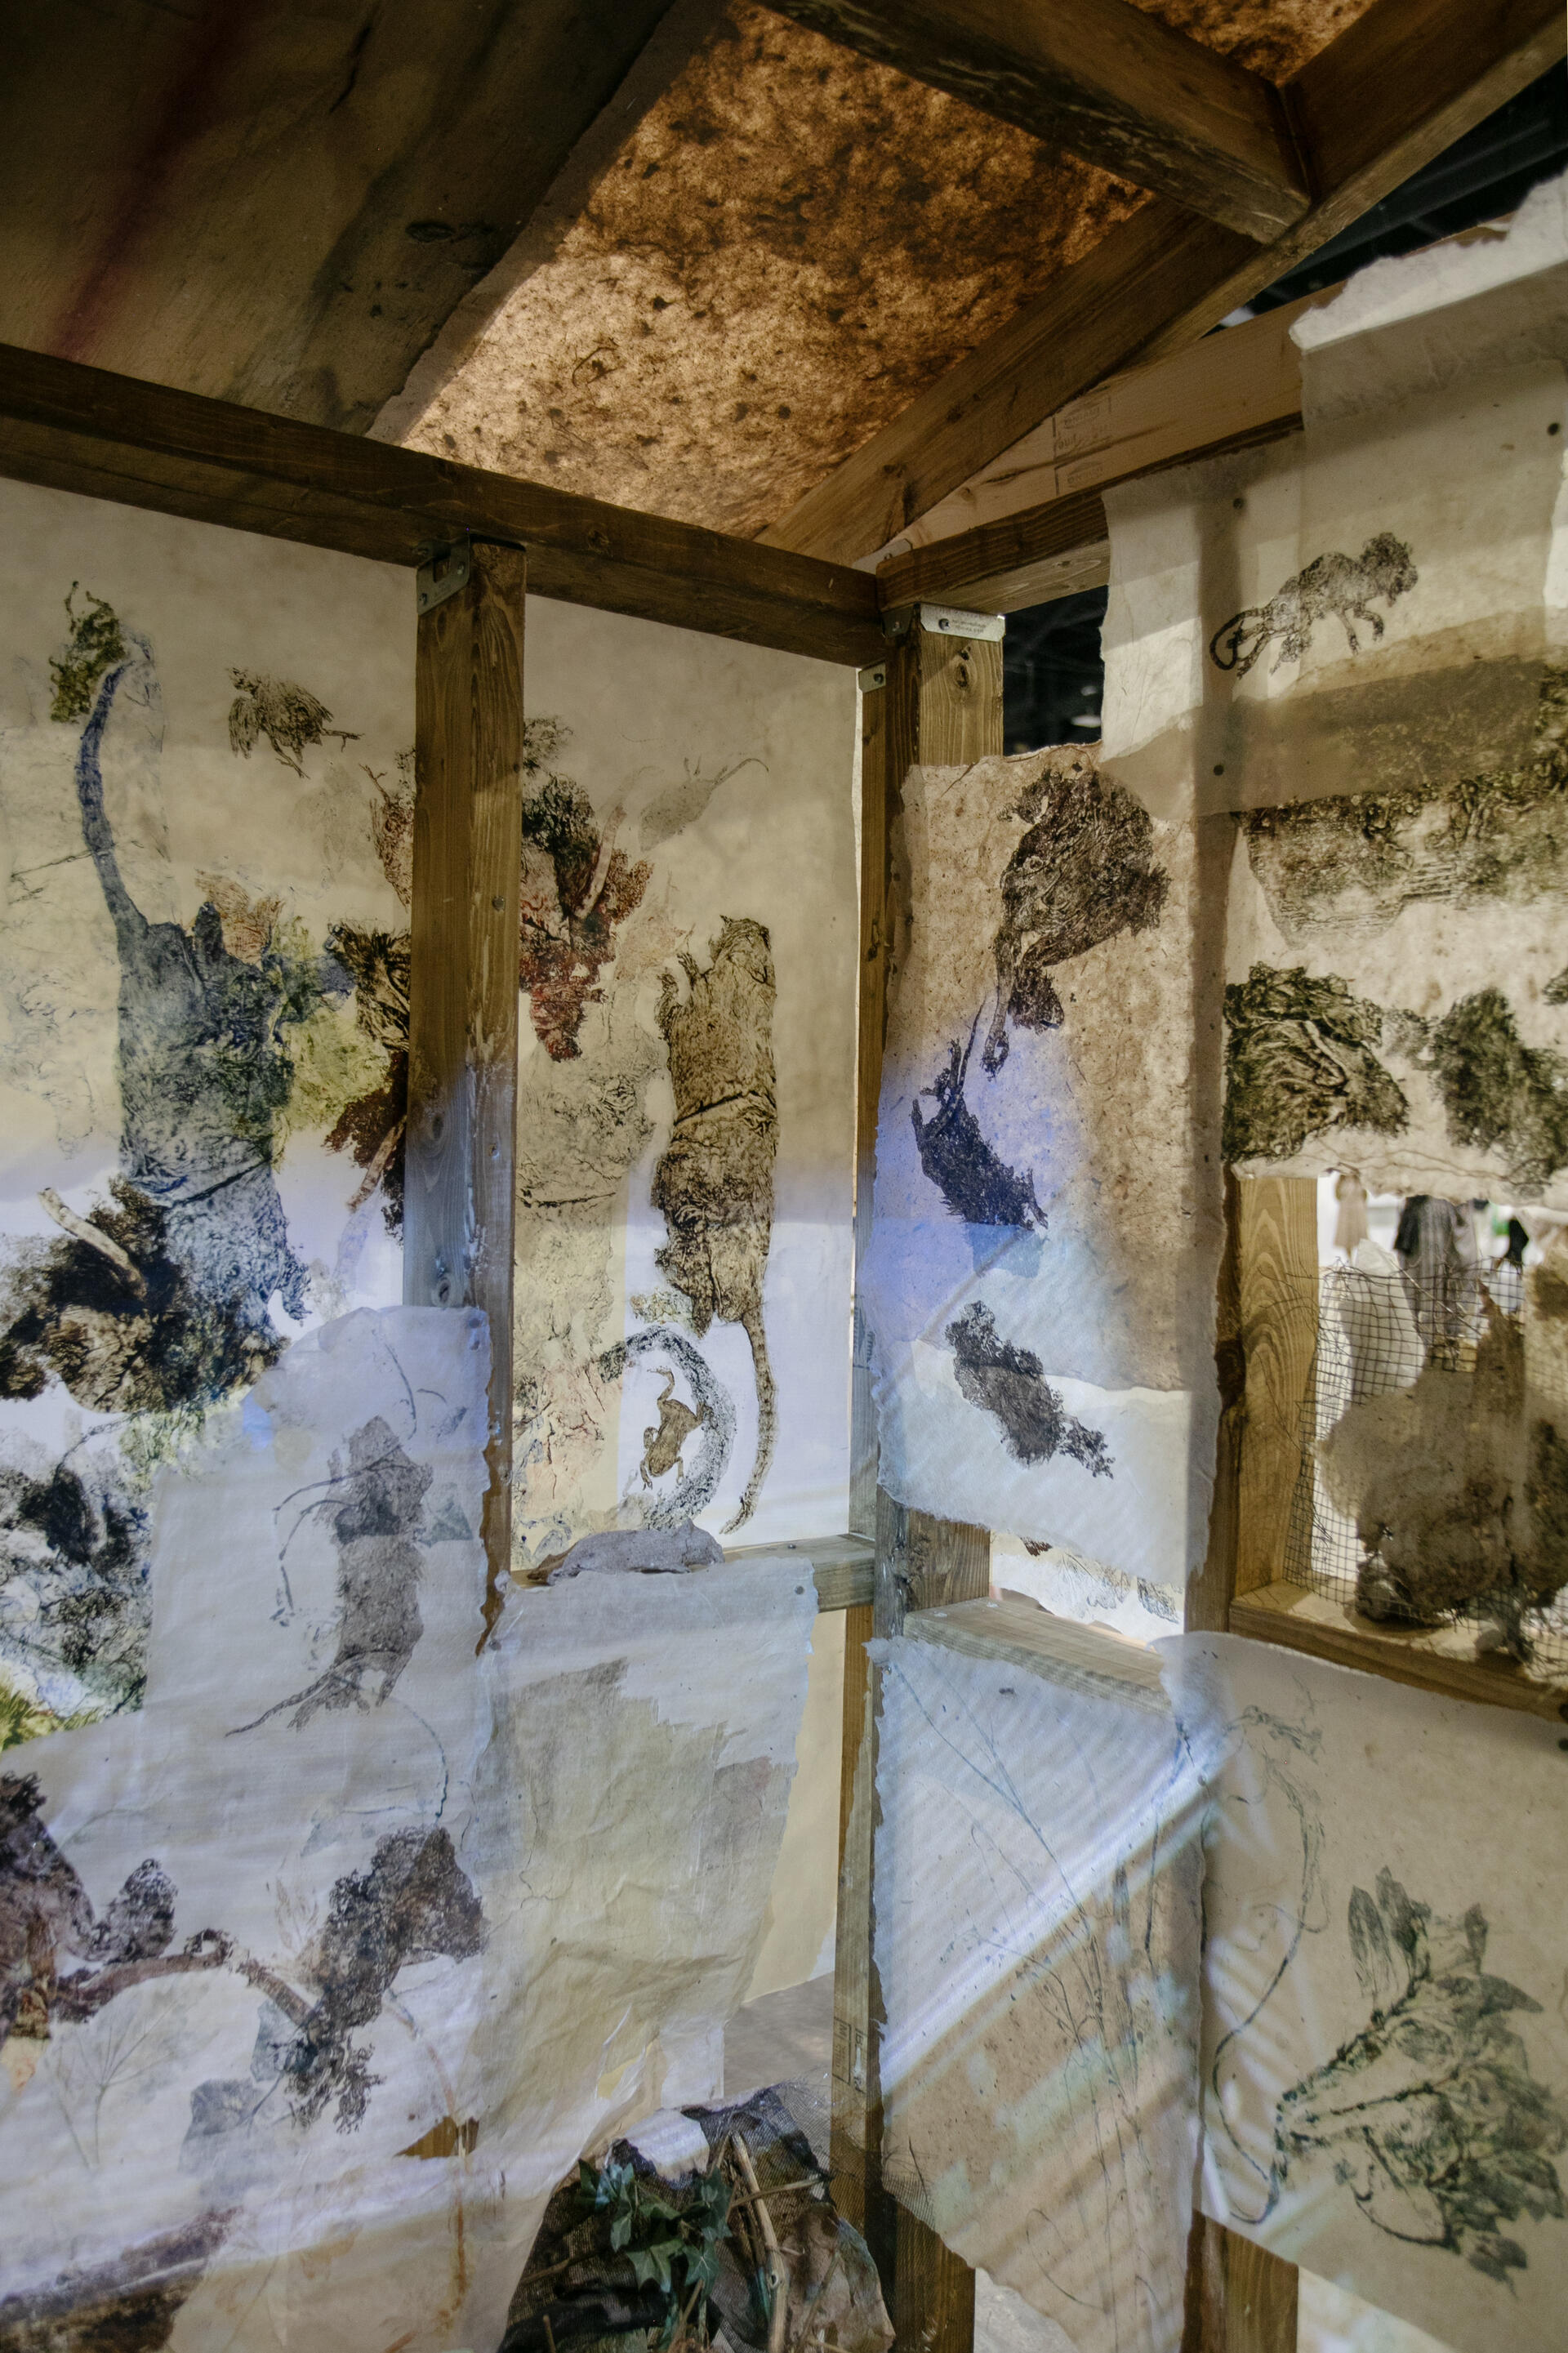 a corner inside the stucture, with prints of plants various roadkill, some rats, a snake, a toad and bird. Some are unrecognizable. a light projection of a house in one of the walls. 